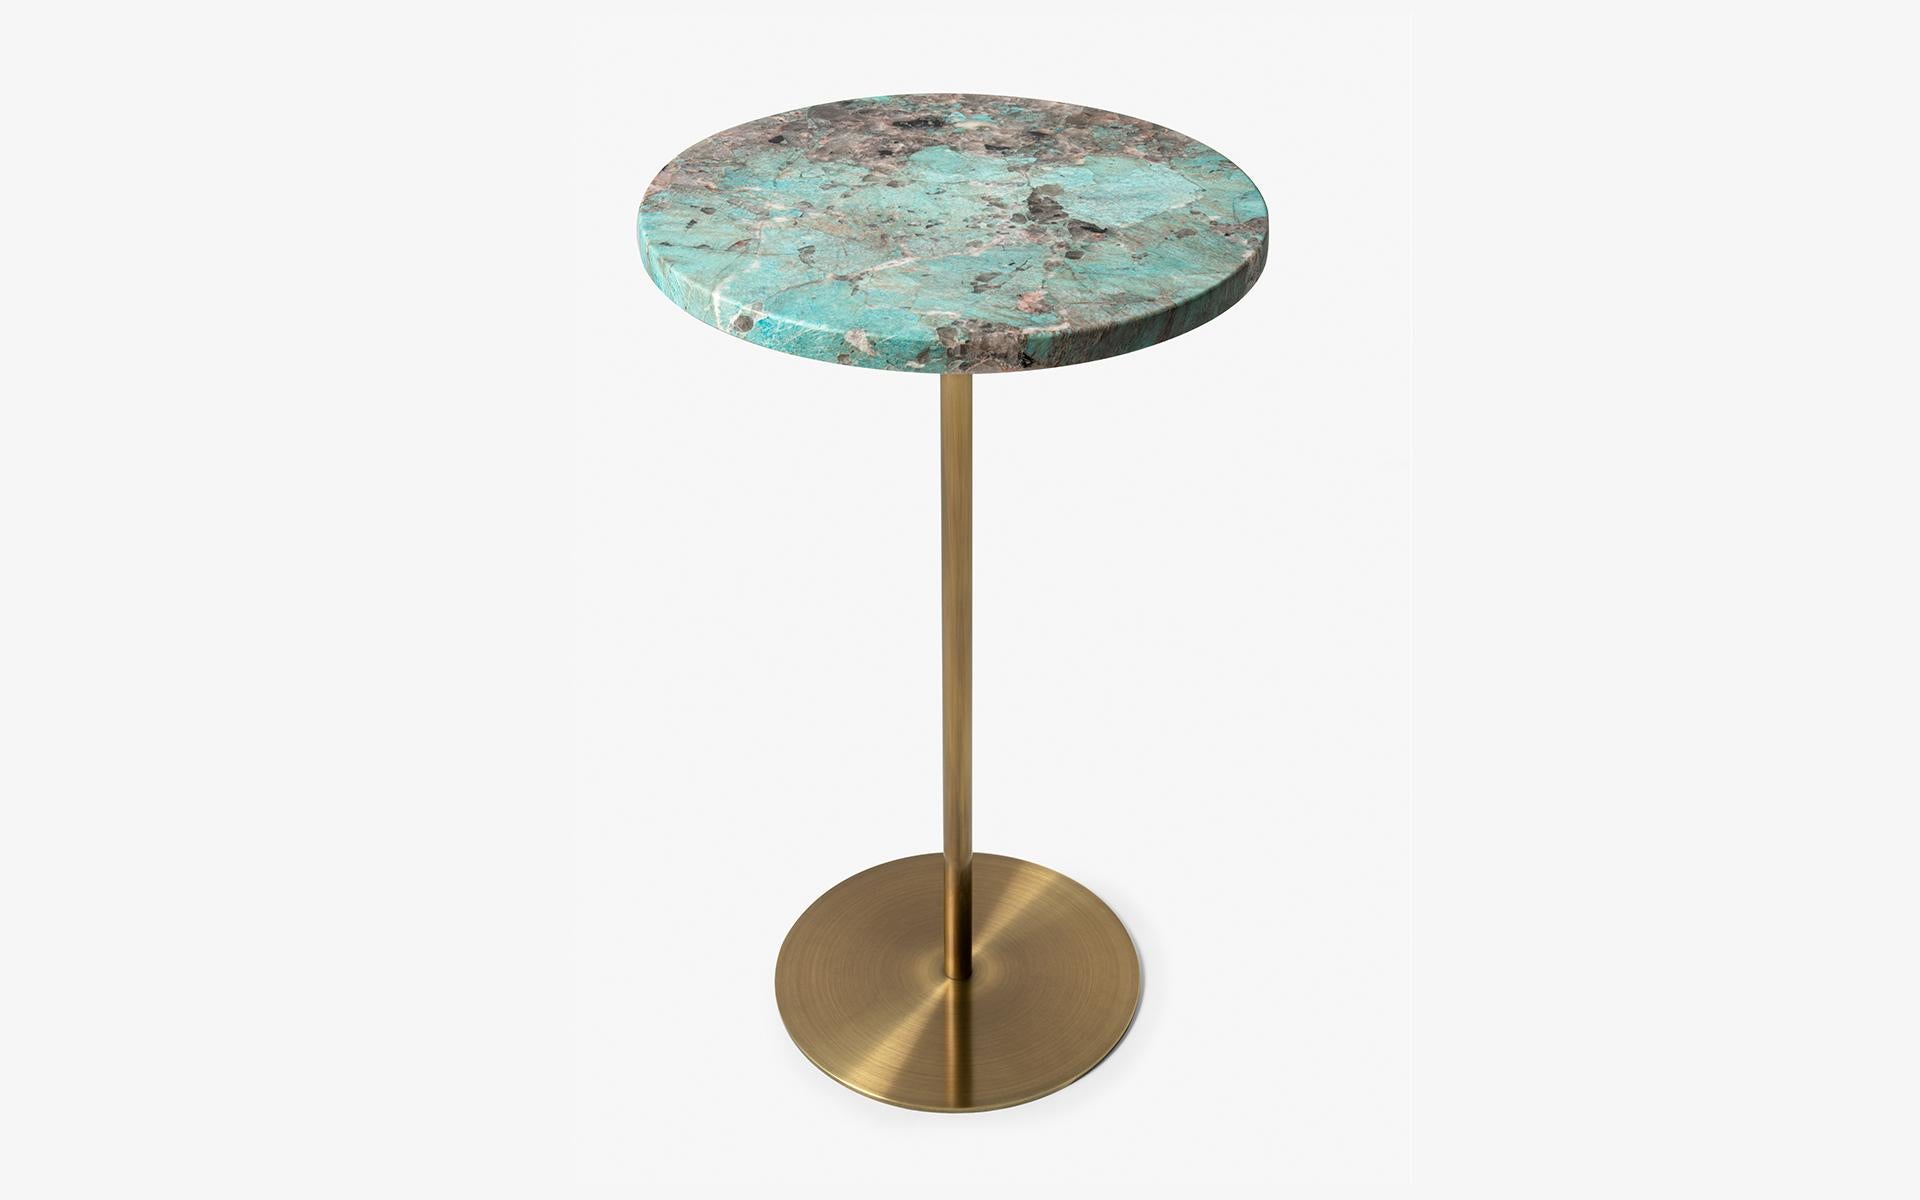 Turkish Basic Brass Plated Metal & Turquoise Blue Marble Side Table 'Large' For Sale